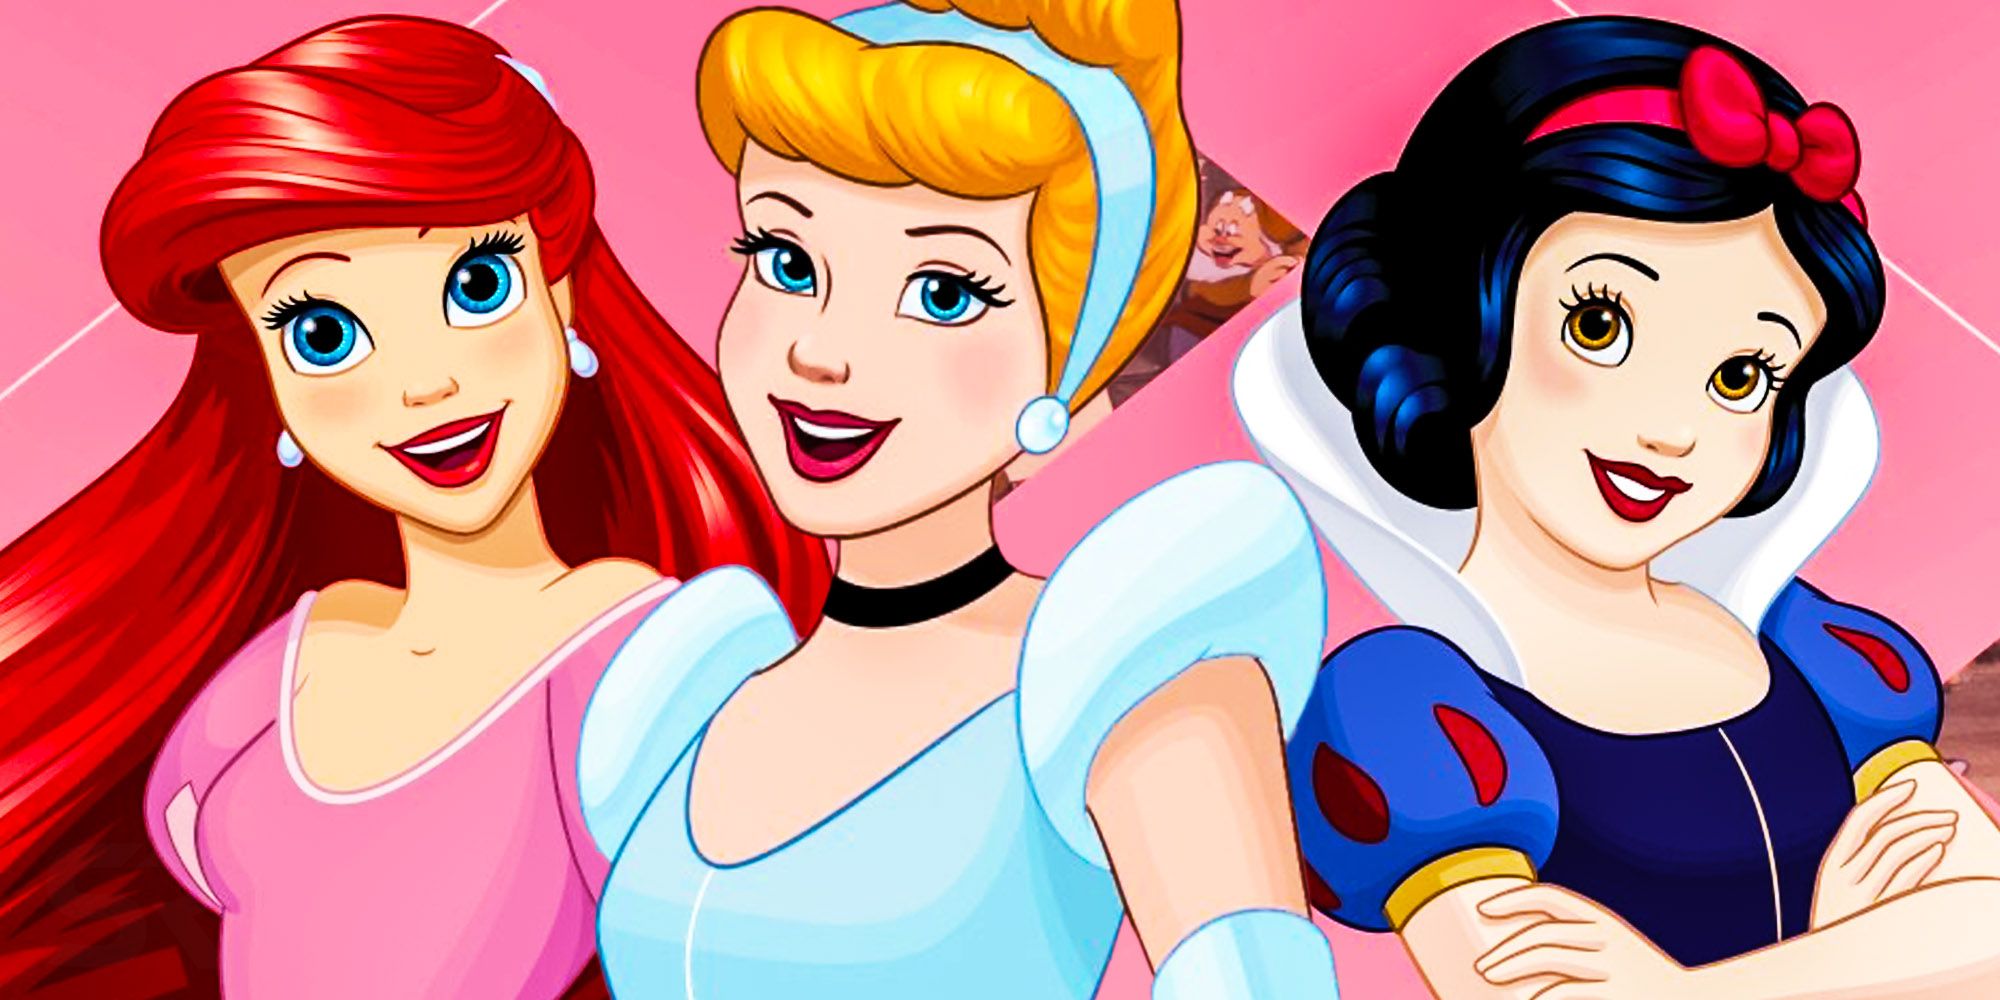 Disney Princess Movie Finally Certified Fresh on Rotten Tomatoes 73 Years After Release